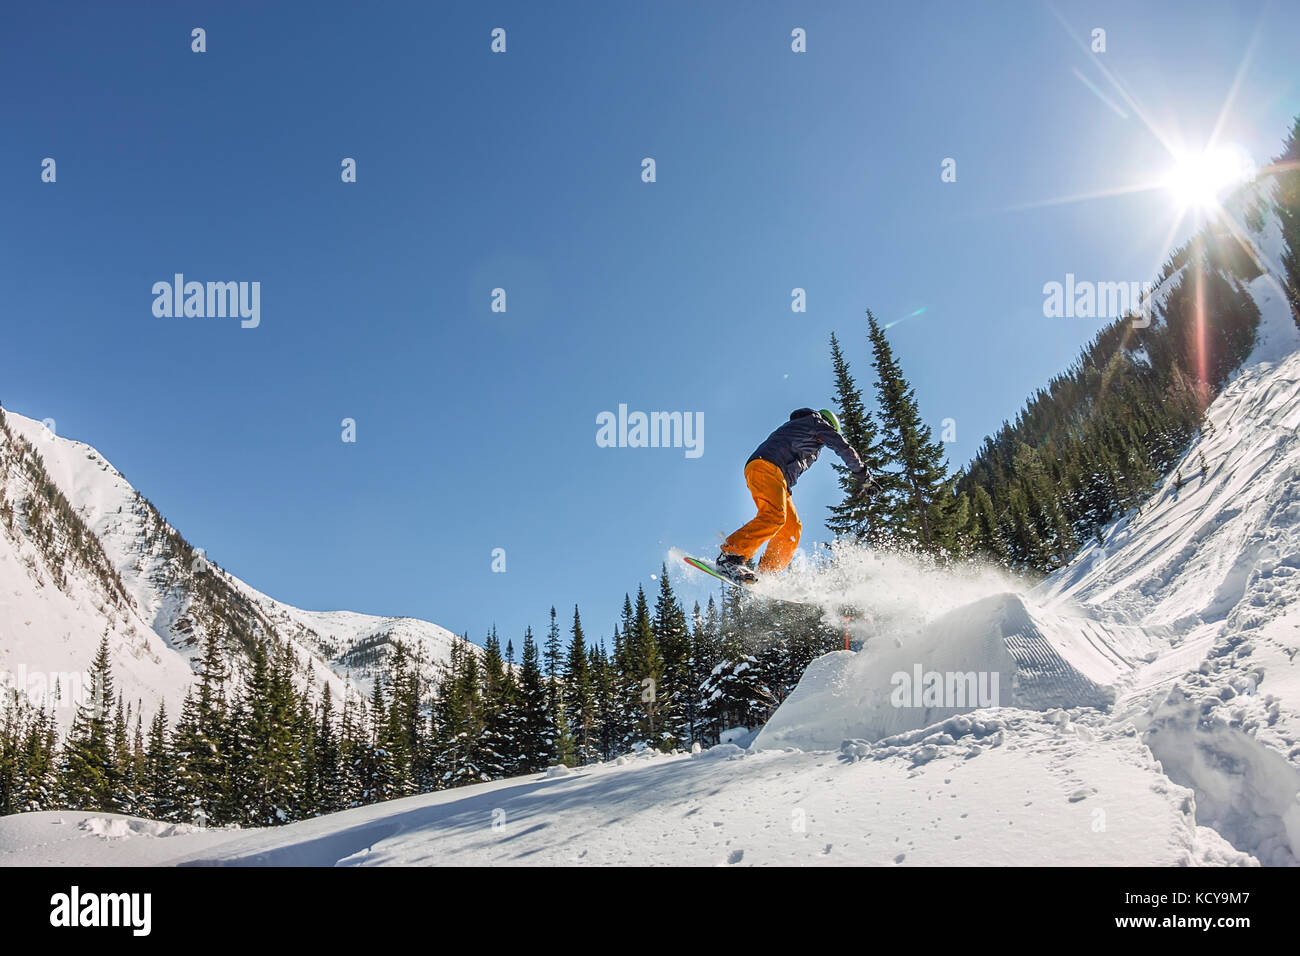 Snowboarder freerider jumping from a snow ramp in the sun on a background of forest and mountains. Stock Photo